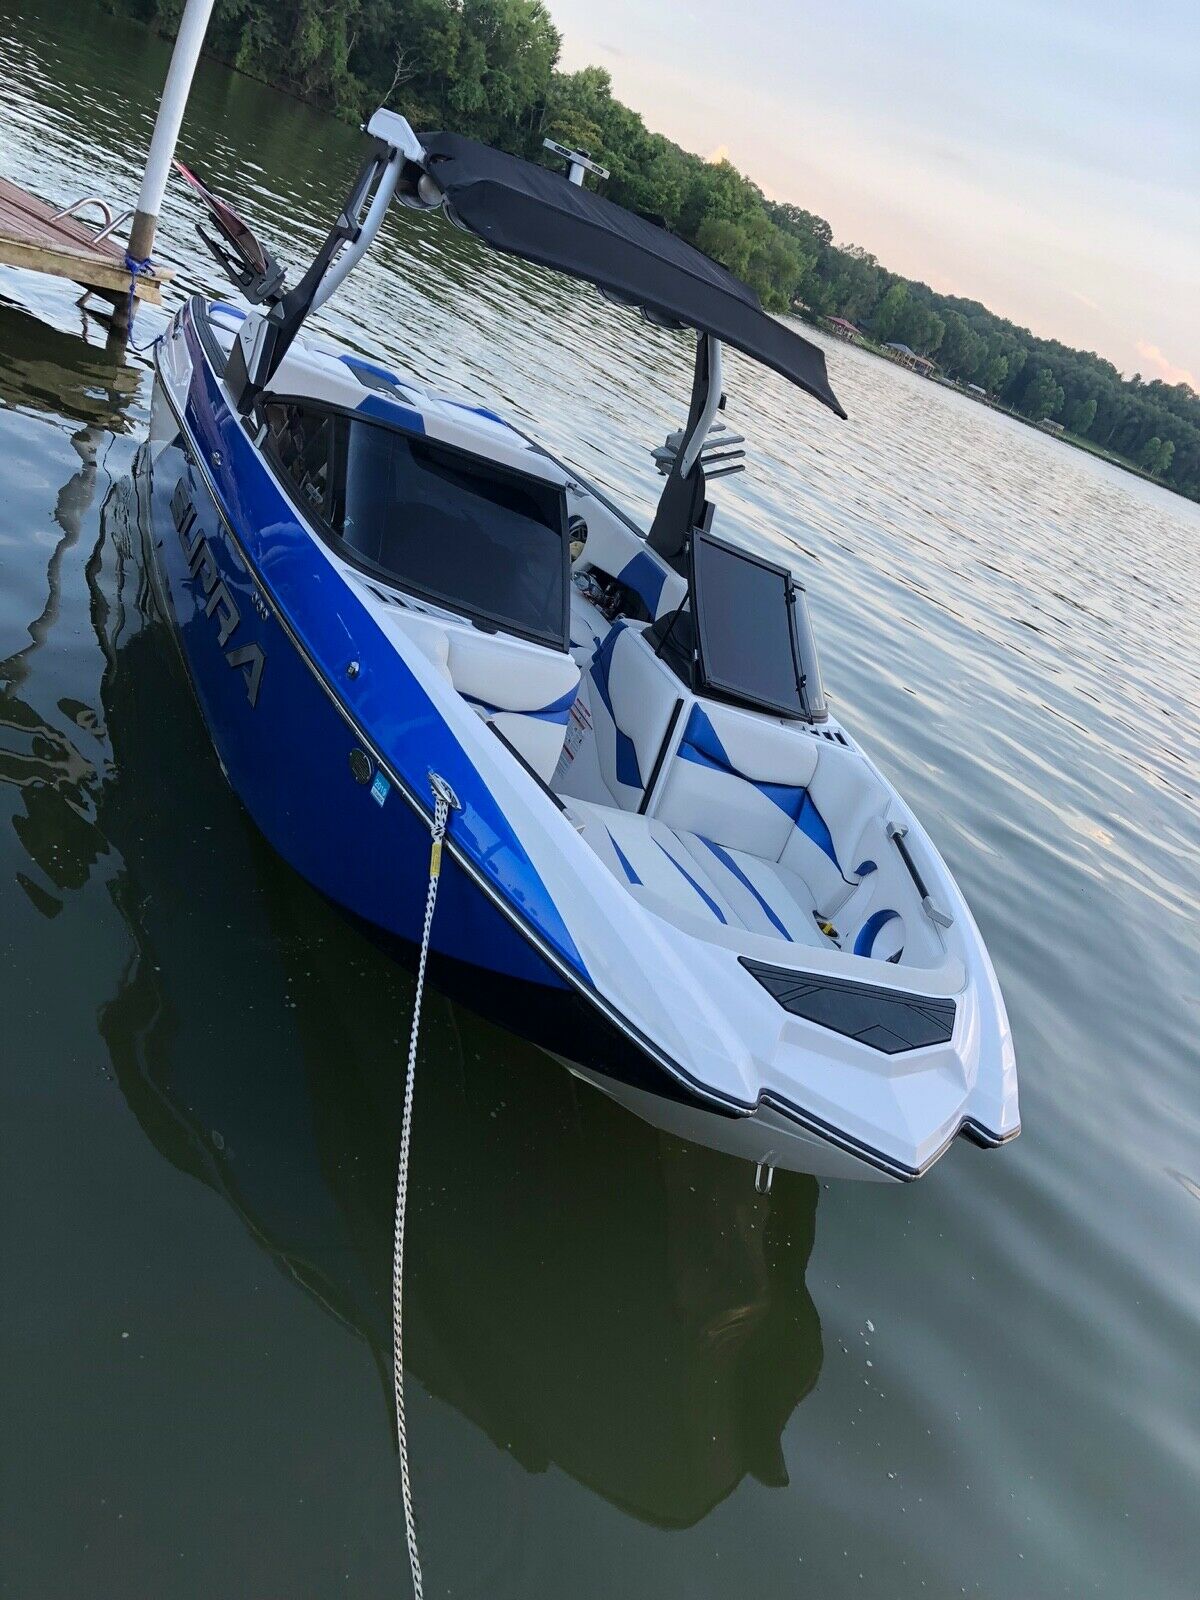 Supra Sl550 2018 for sale for $75,000 - Boats-from-USA.com